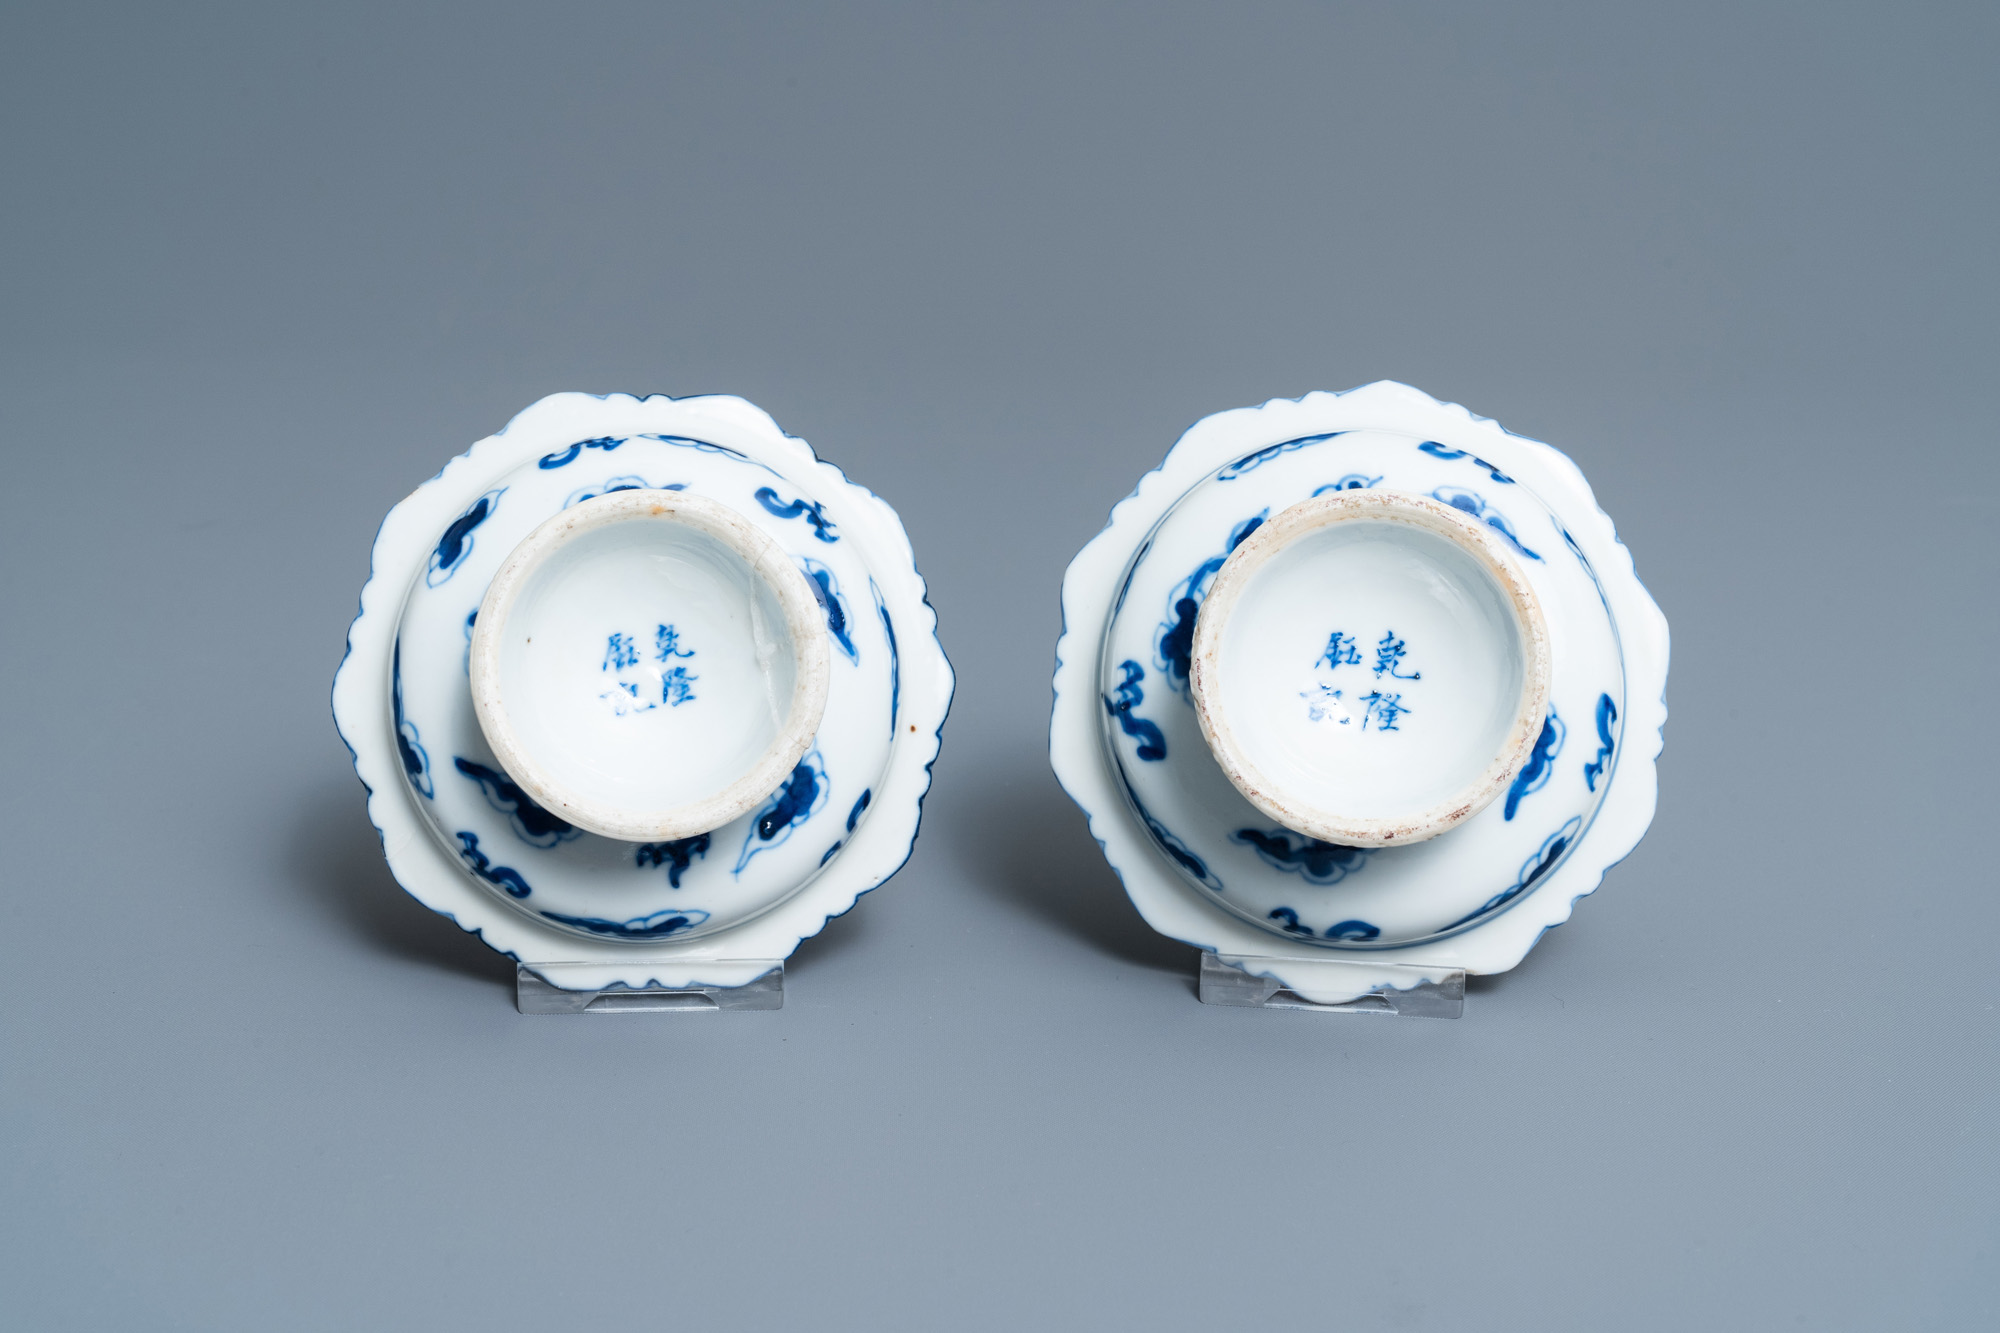 A varied collection of Chinese porcelain, 19th C. - Image 13 of 19